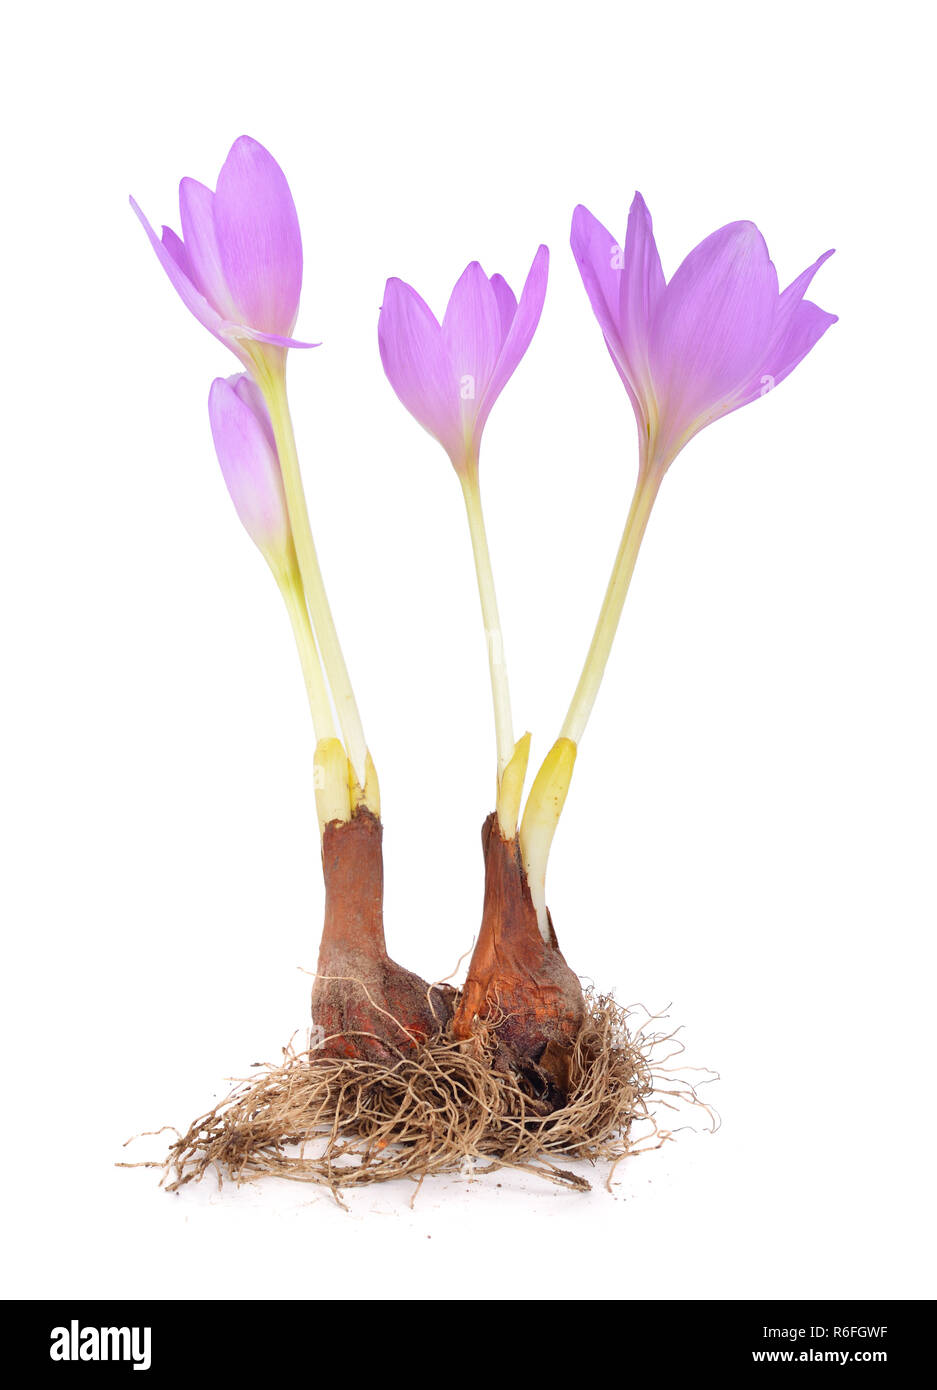 Colchicum flower with bulb. Isolated on white background. Stock Photo